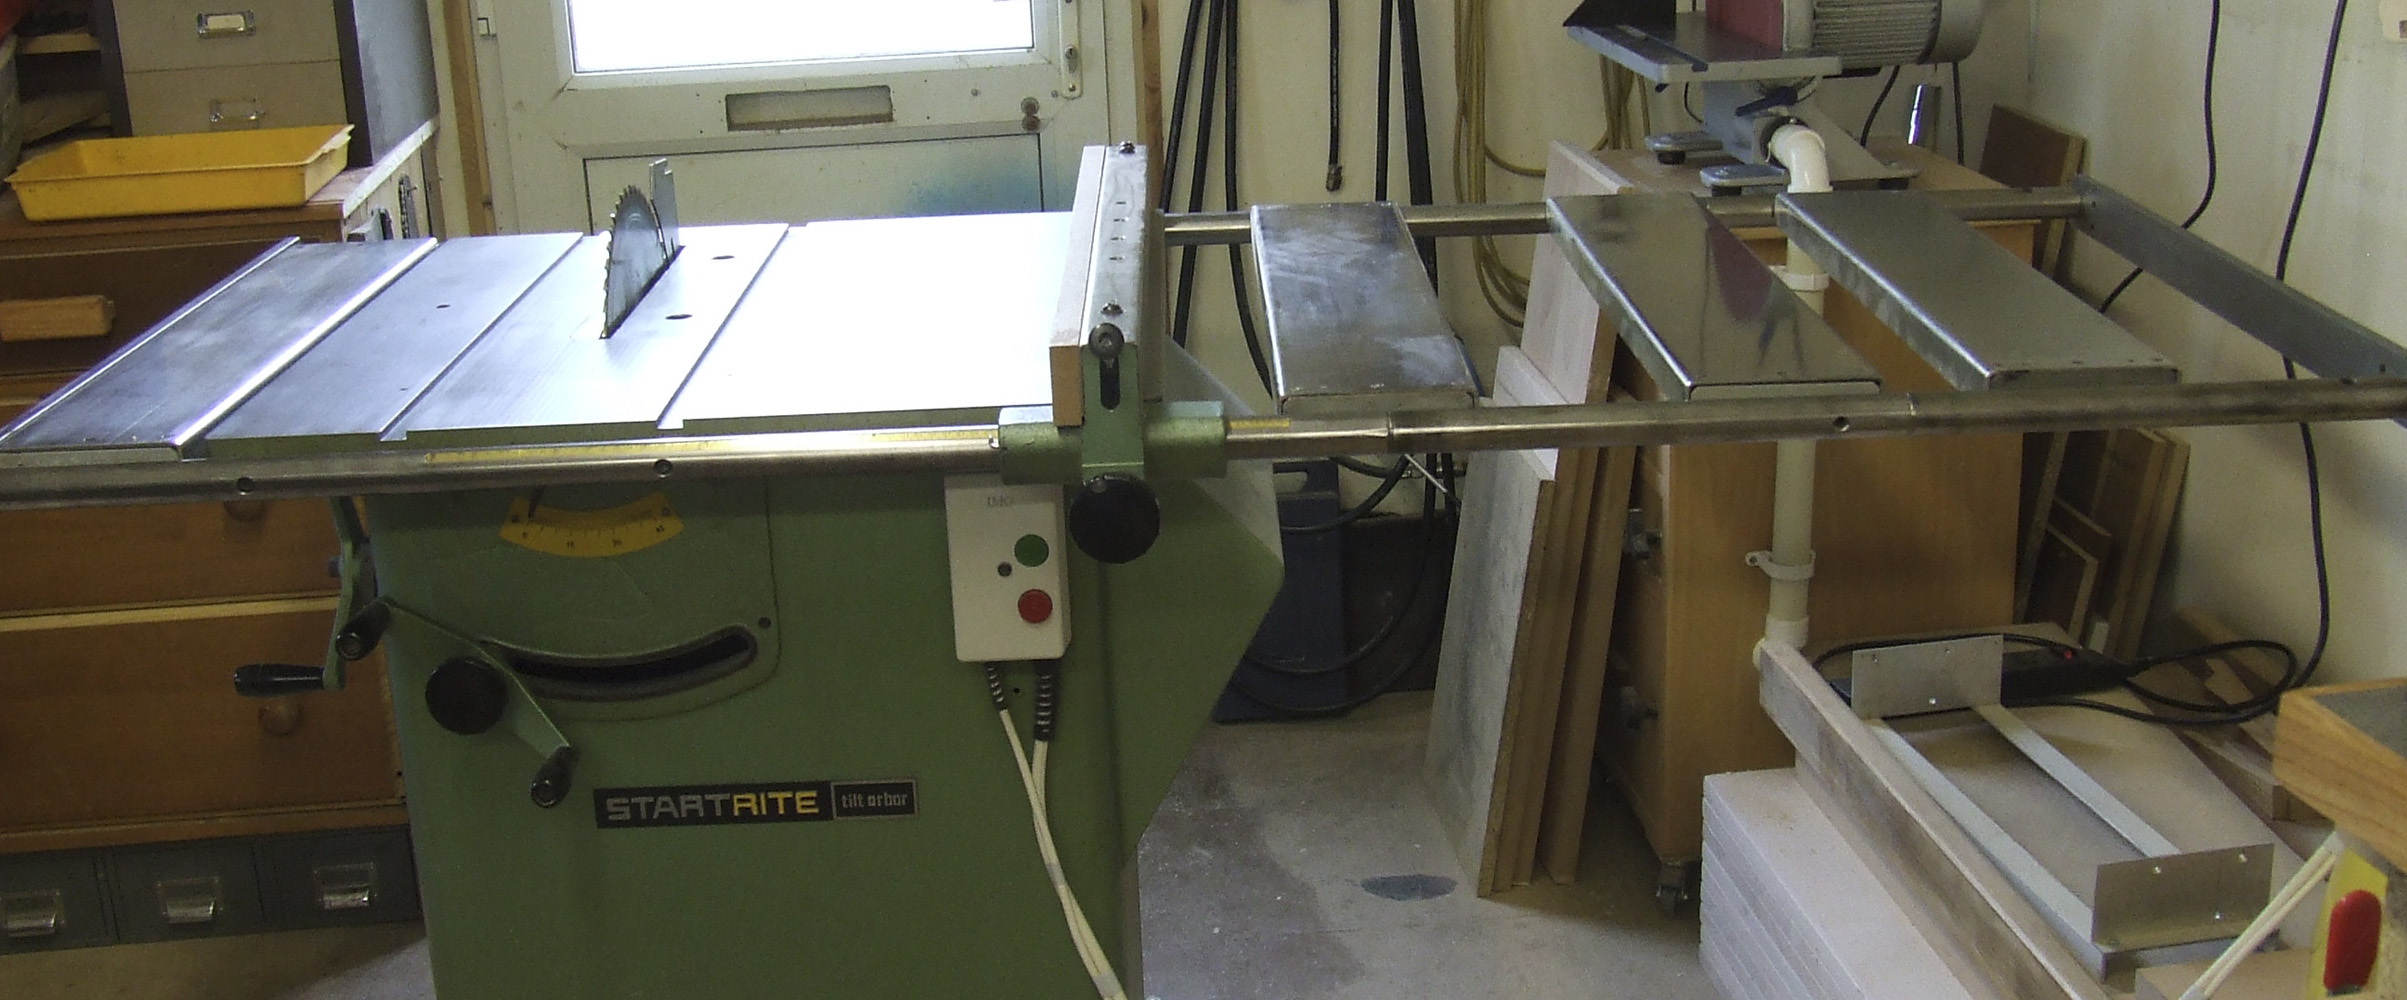 Startrite table saw user manual download